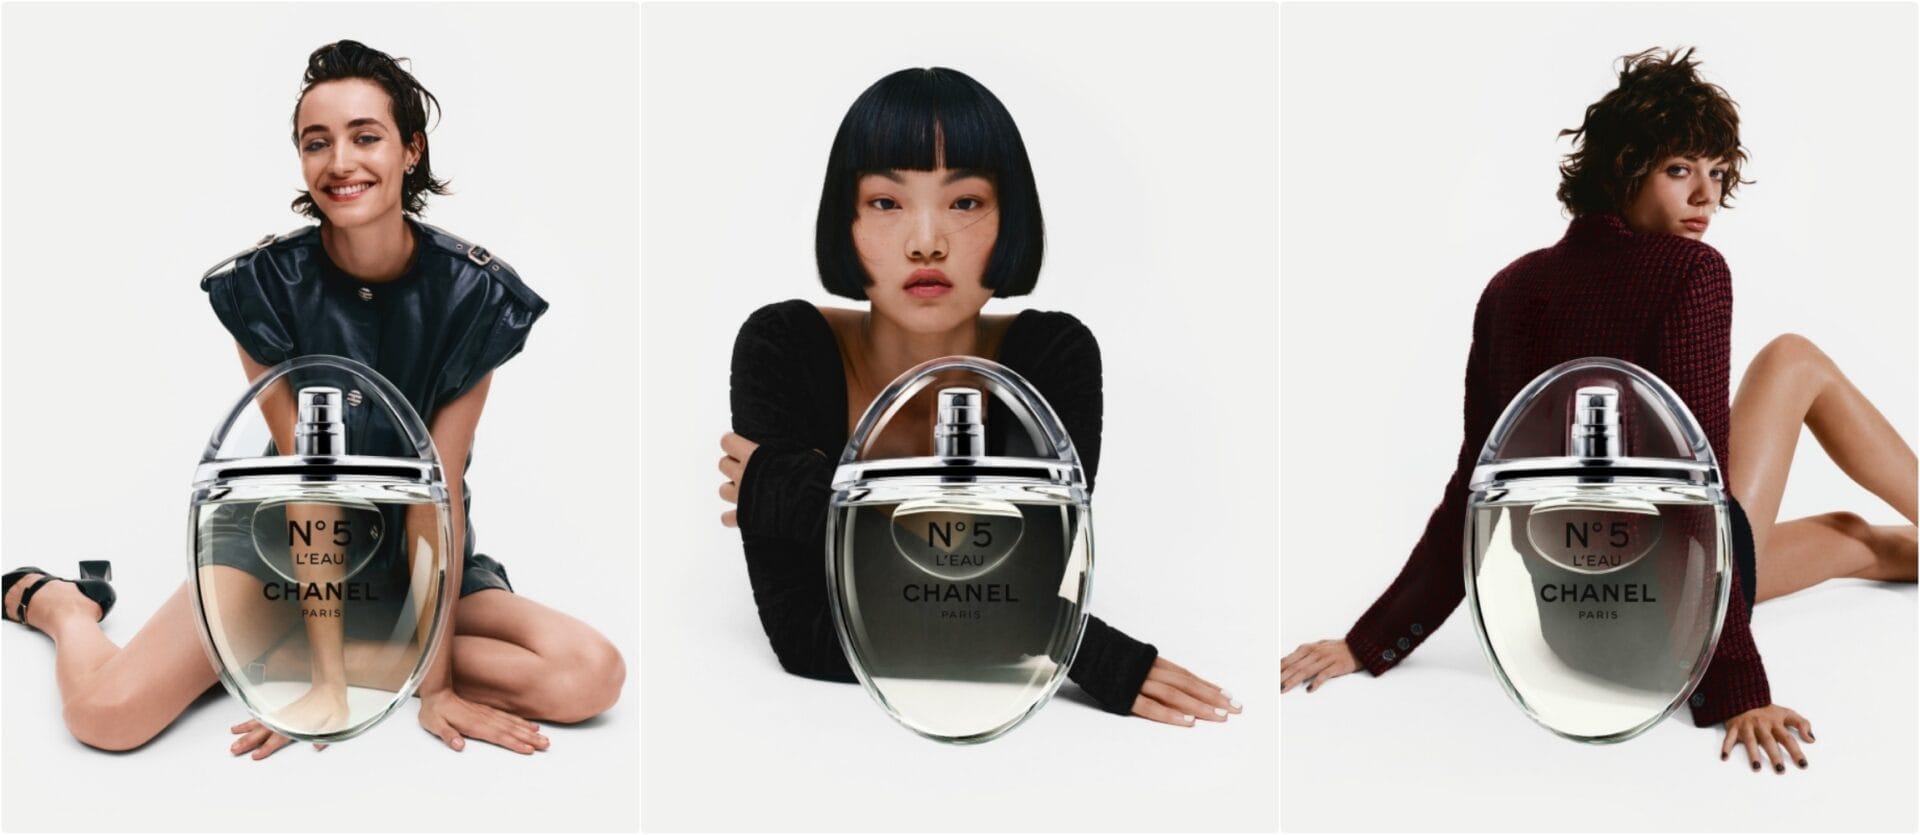 Campaign images for the Limited Edition N°5 L’Eau Drop from Chanel